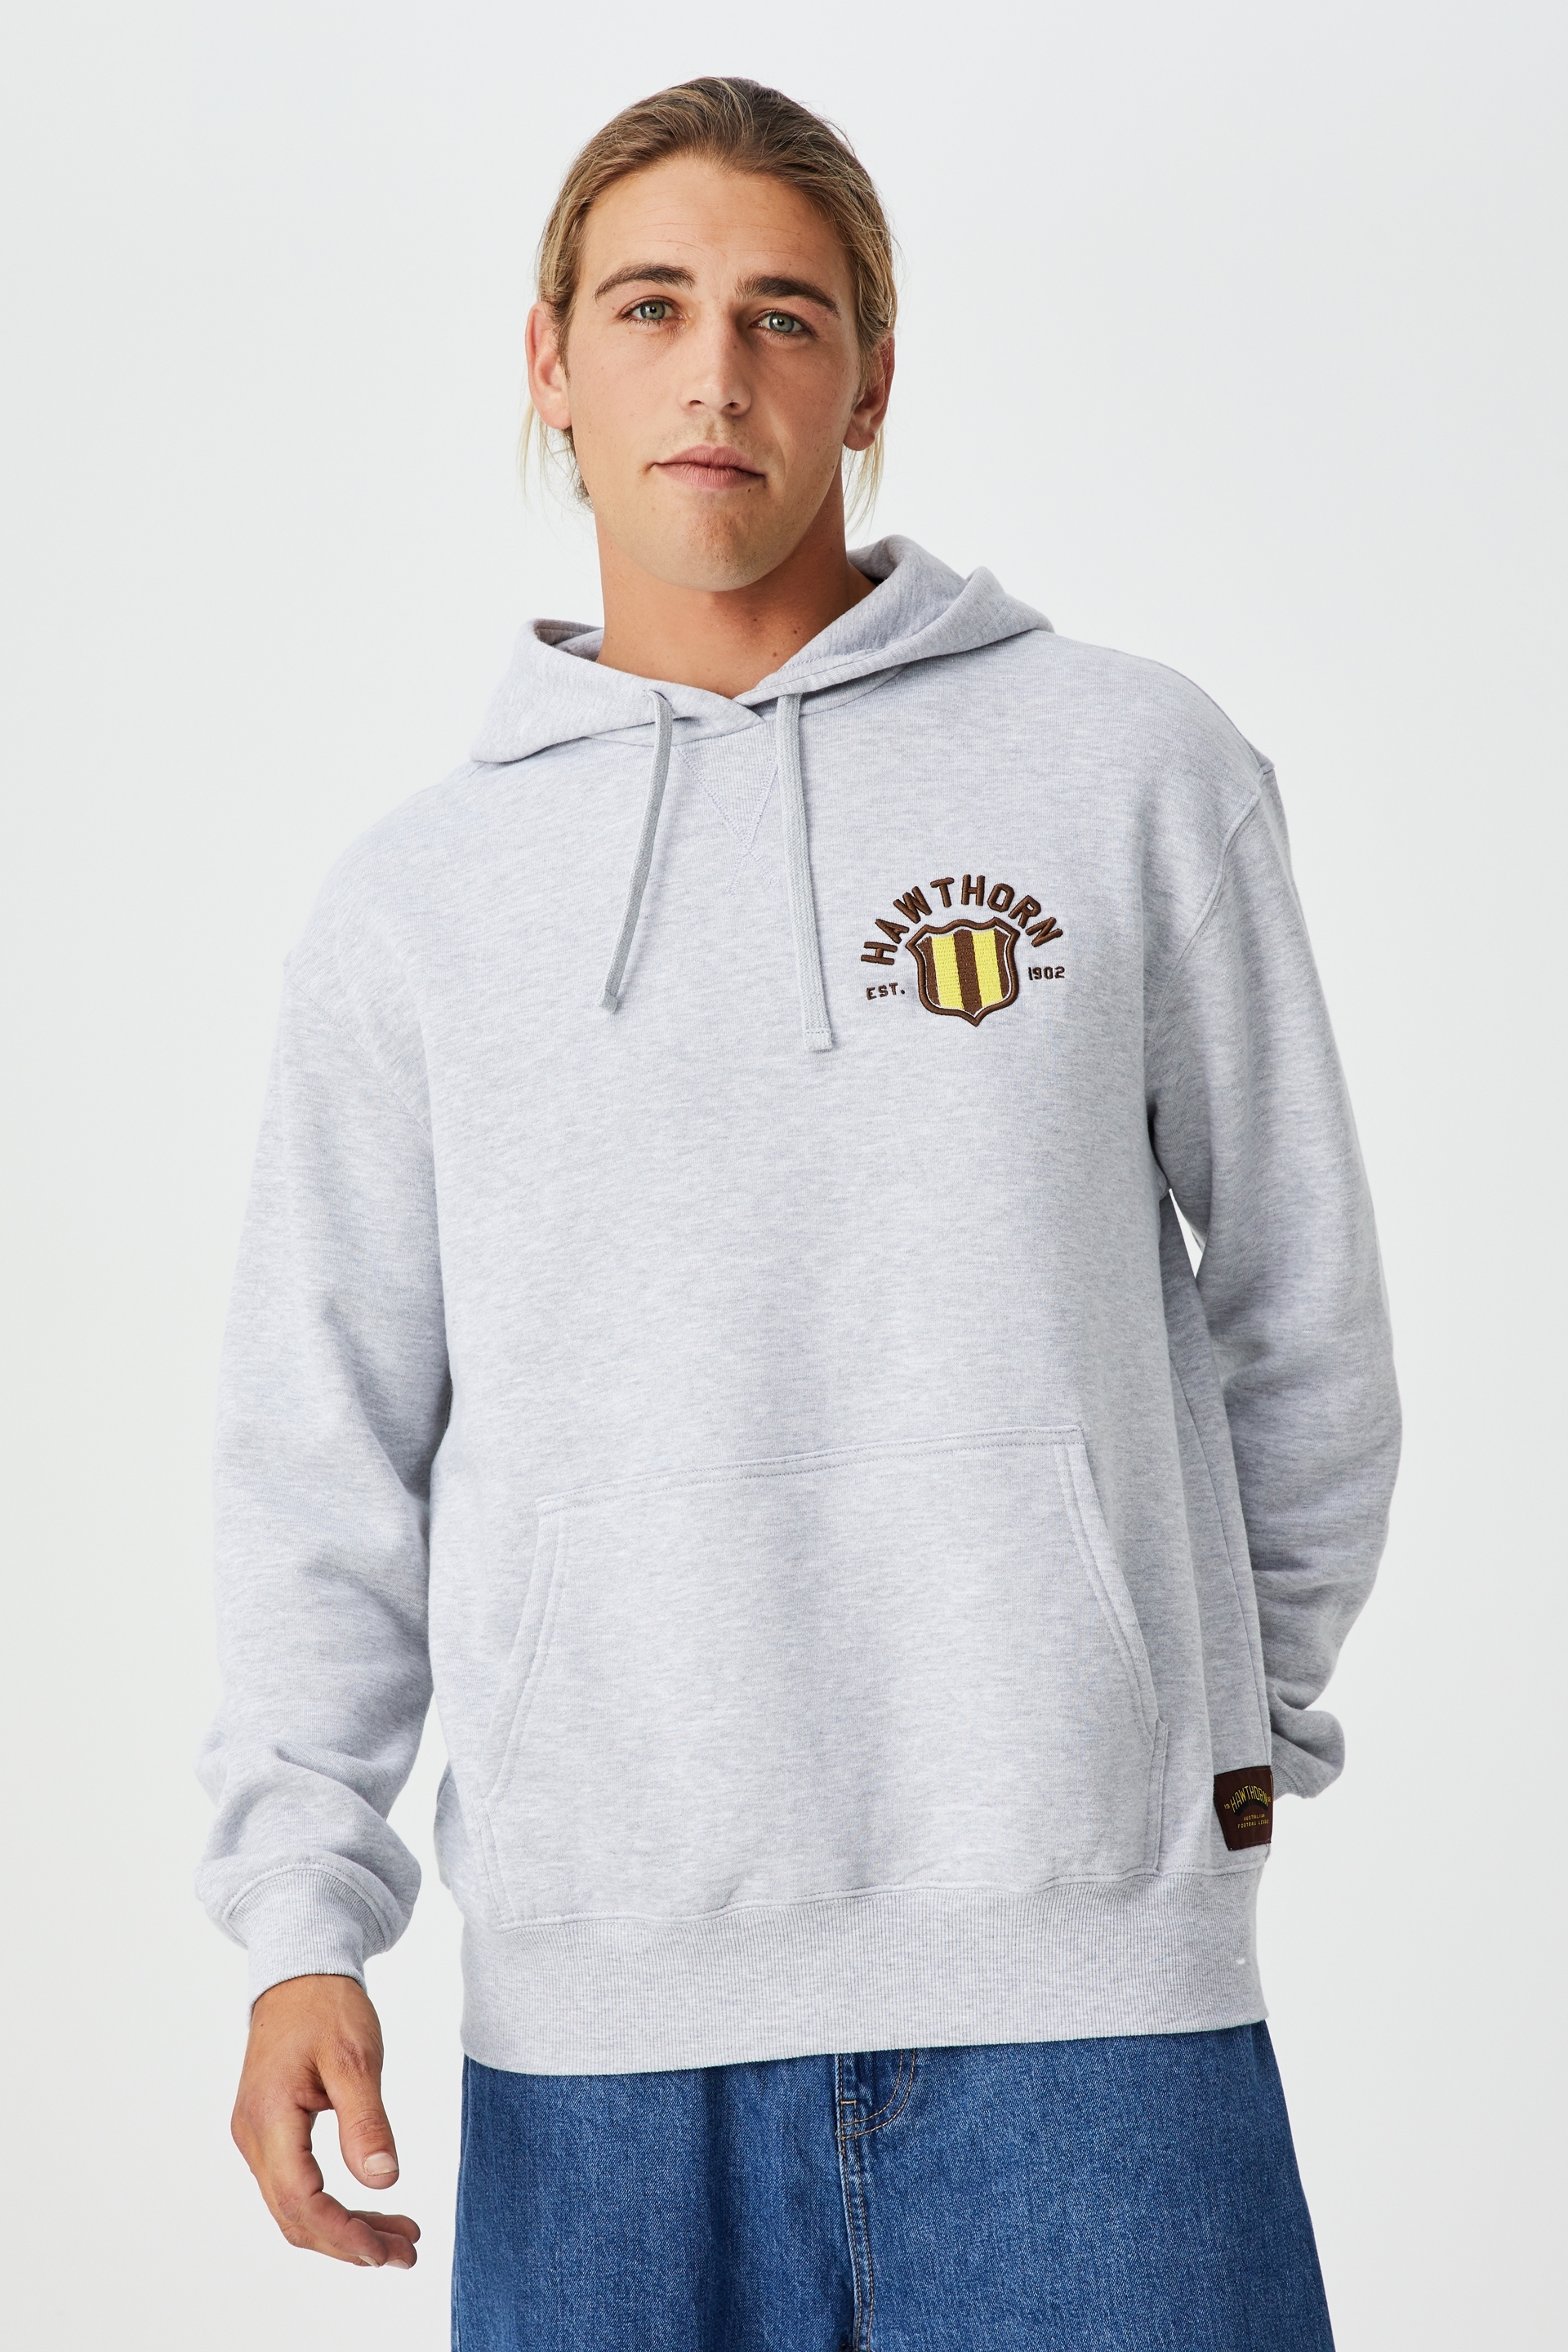 AFL - Afl Mens Chest Embroidery Hoodie - Hawthorn